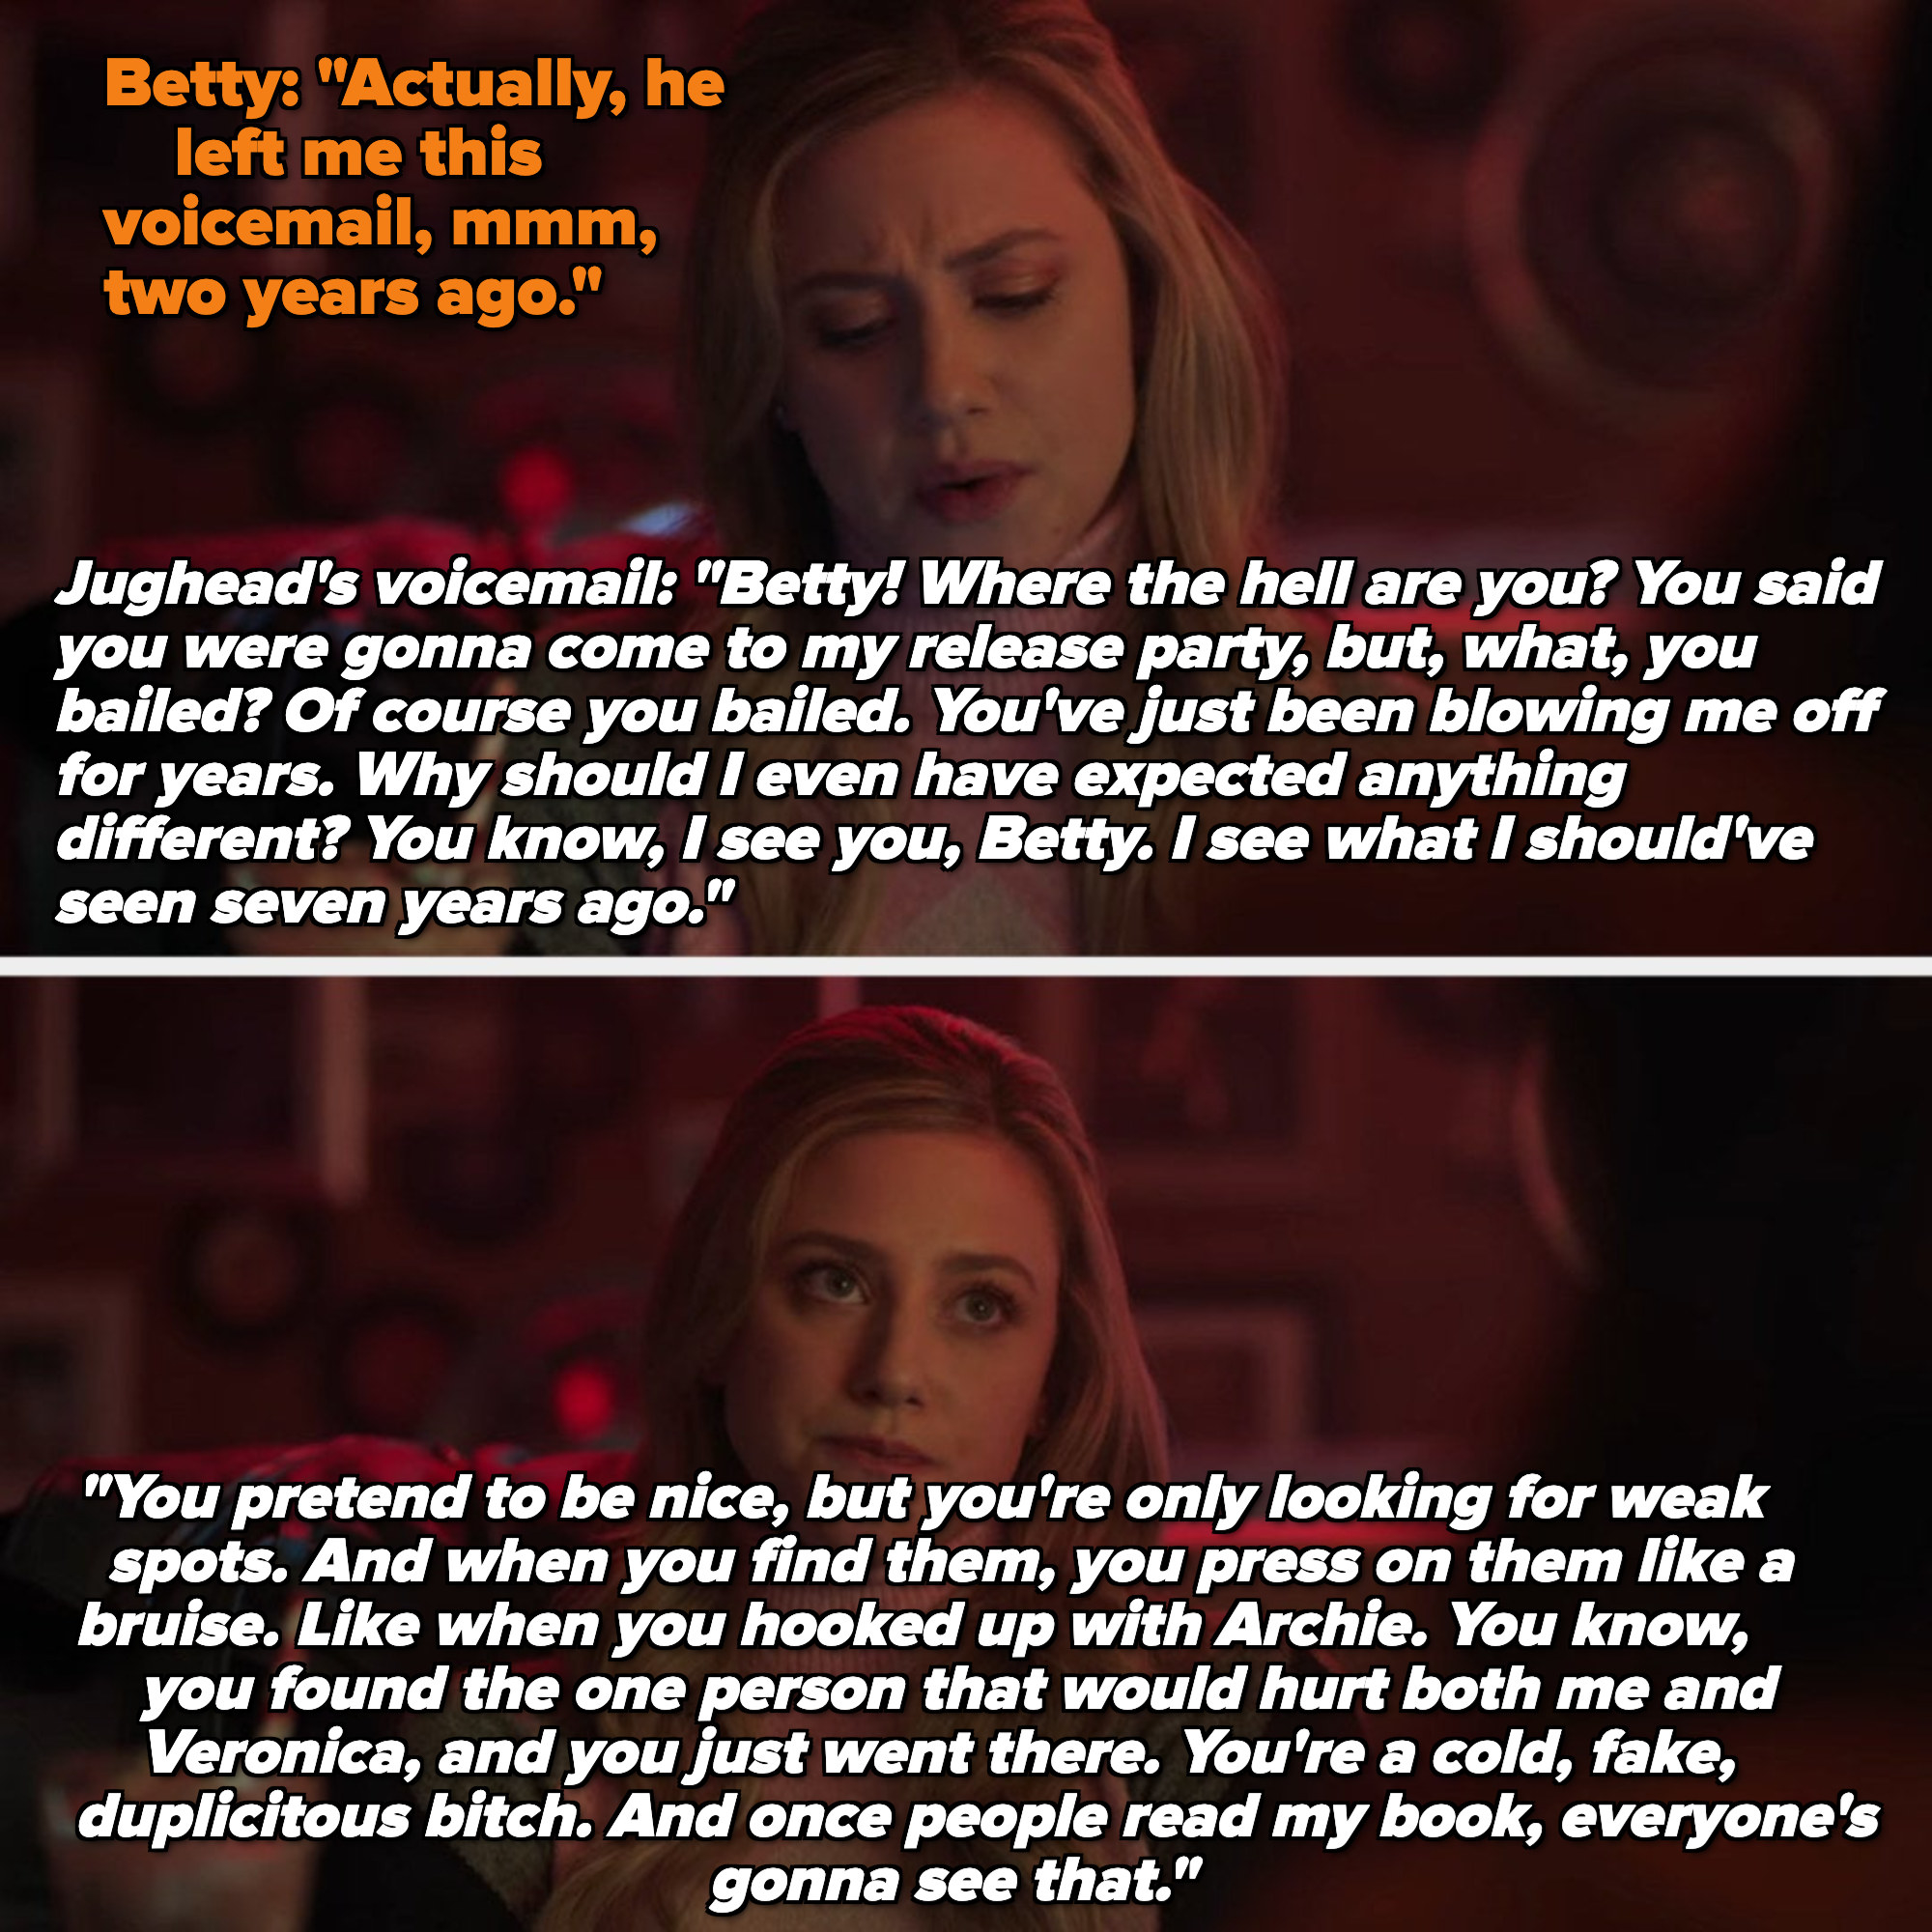 Jughead leaves a voicemail telling Betty she&#x27;s been blowing him off for years and pretends to be nice, and that she&#x27;s a &quot;cold, fake, duplicitous bitch&quot;